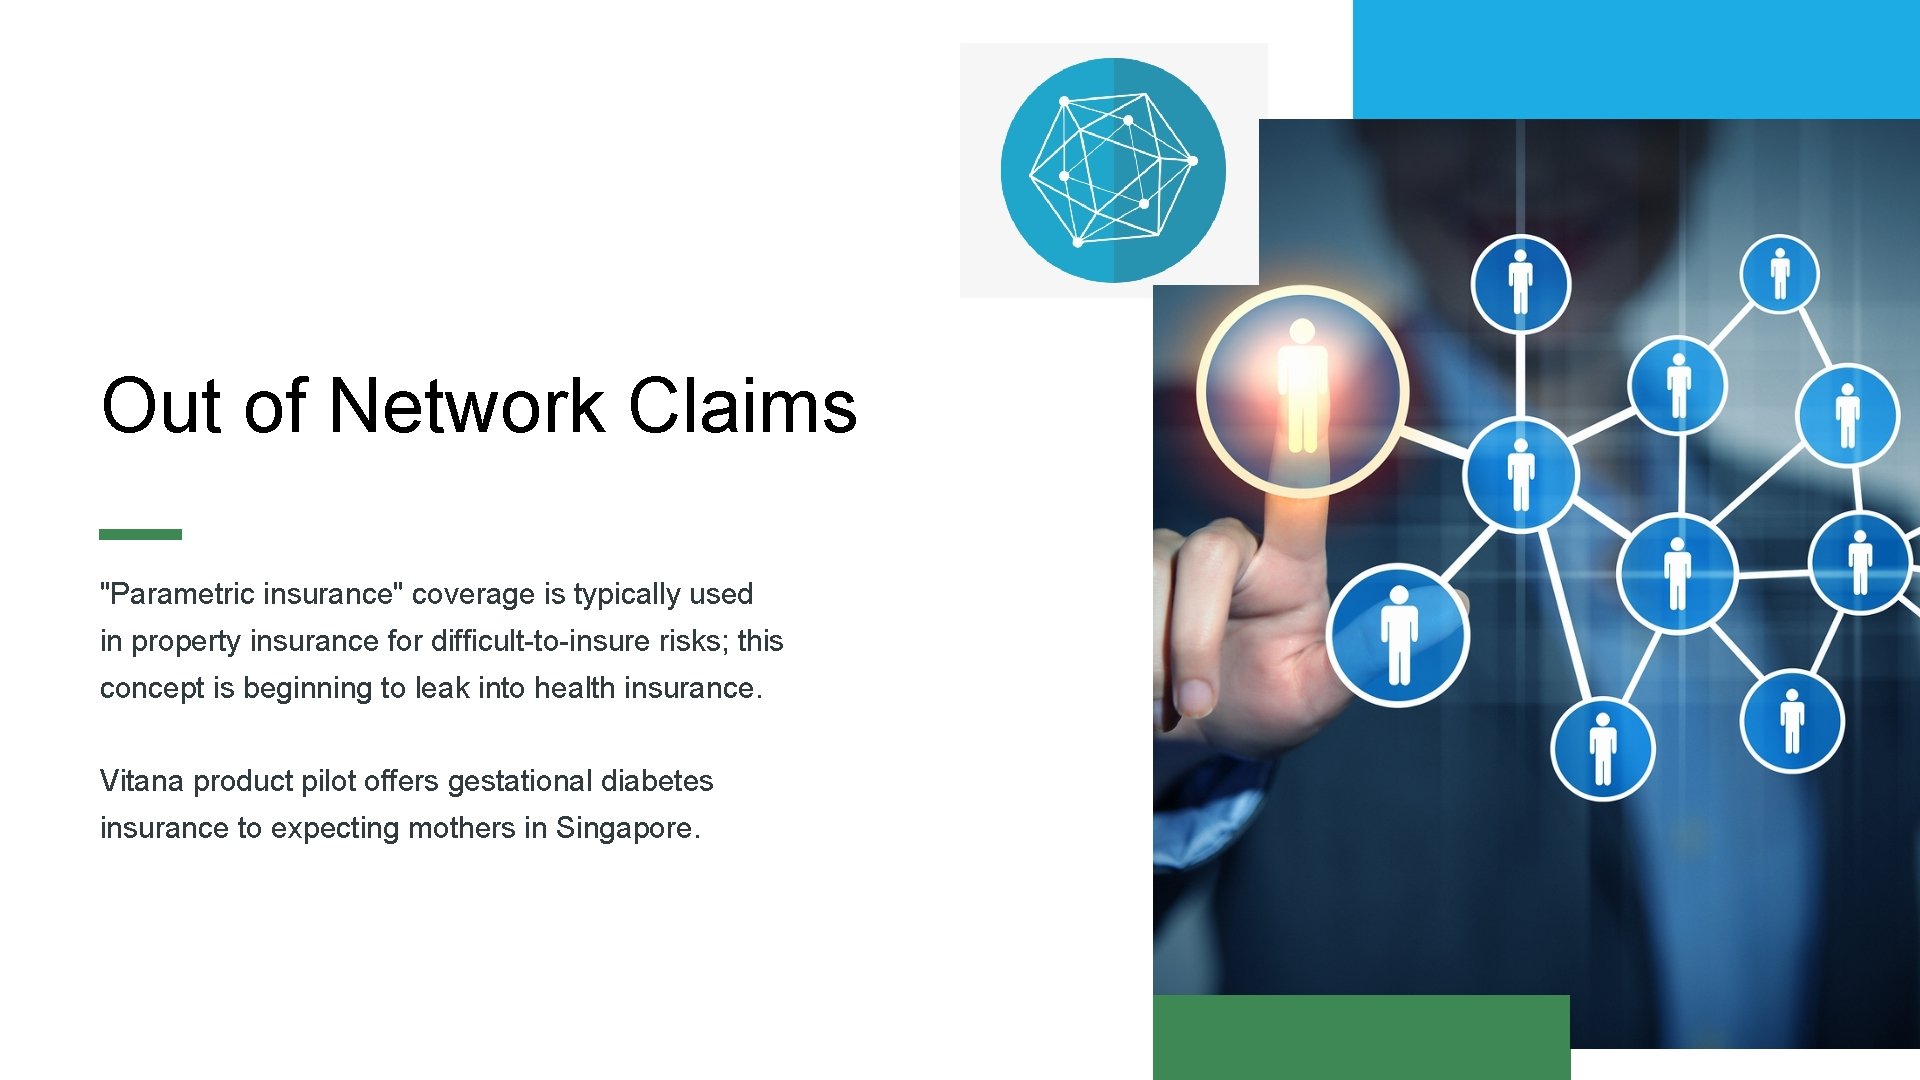 7 Out of Network Claims "Parametric insurance" coverage is typically used in property insurance